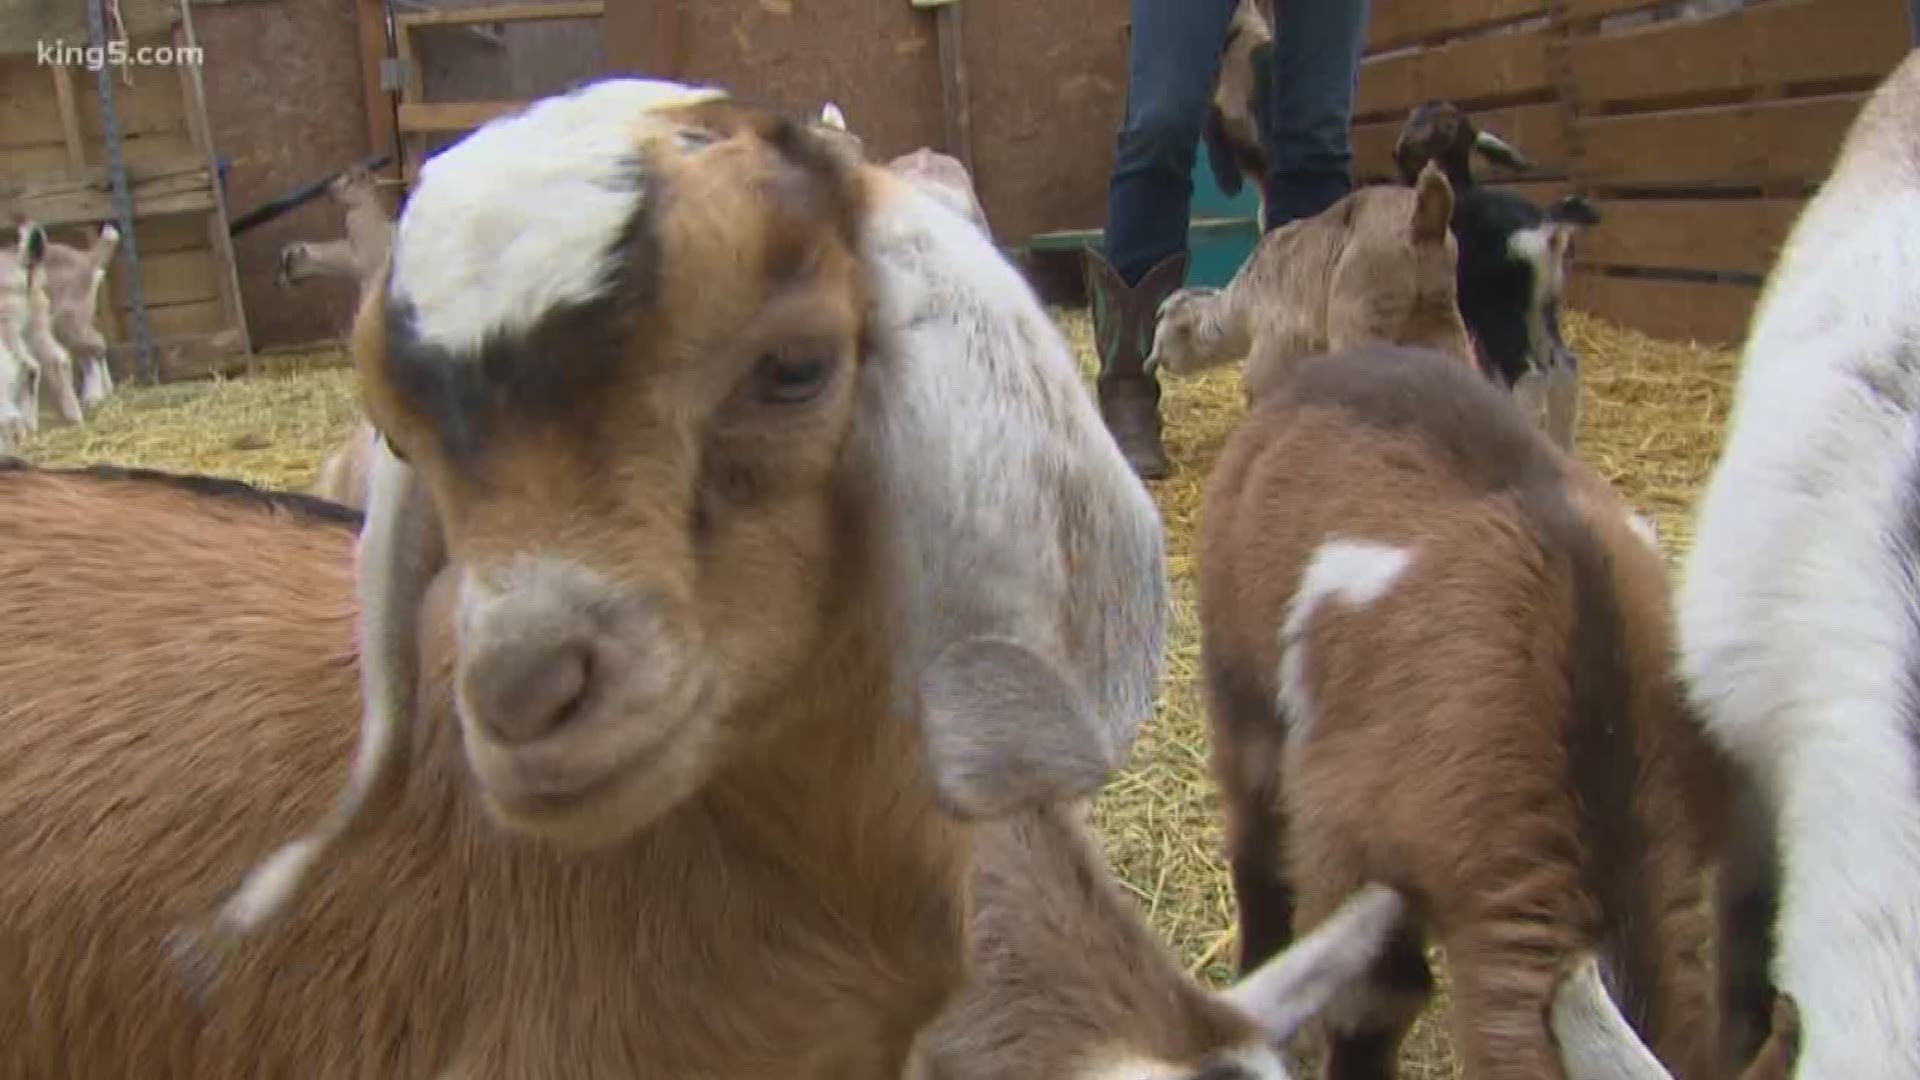 Lost Peacock Creamery is holding day camps for school-age children next week. They'll be able to play with dozens of baby goats and learn all about the farm.